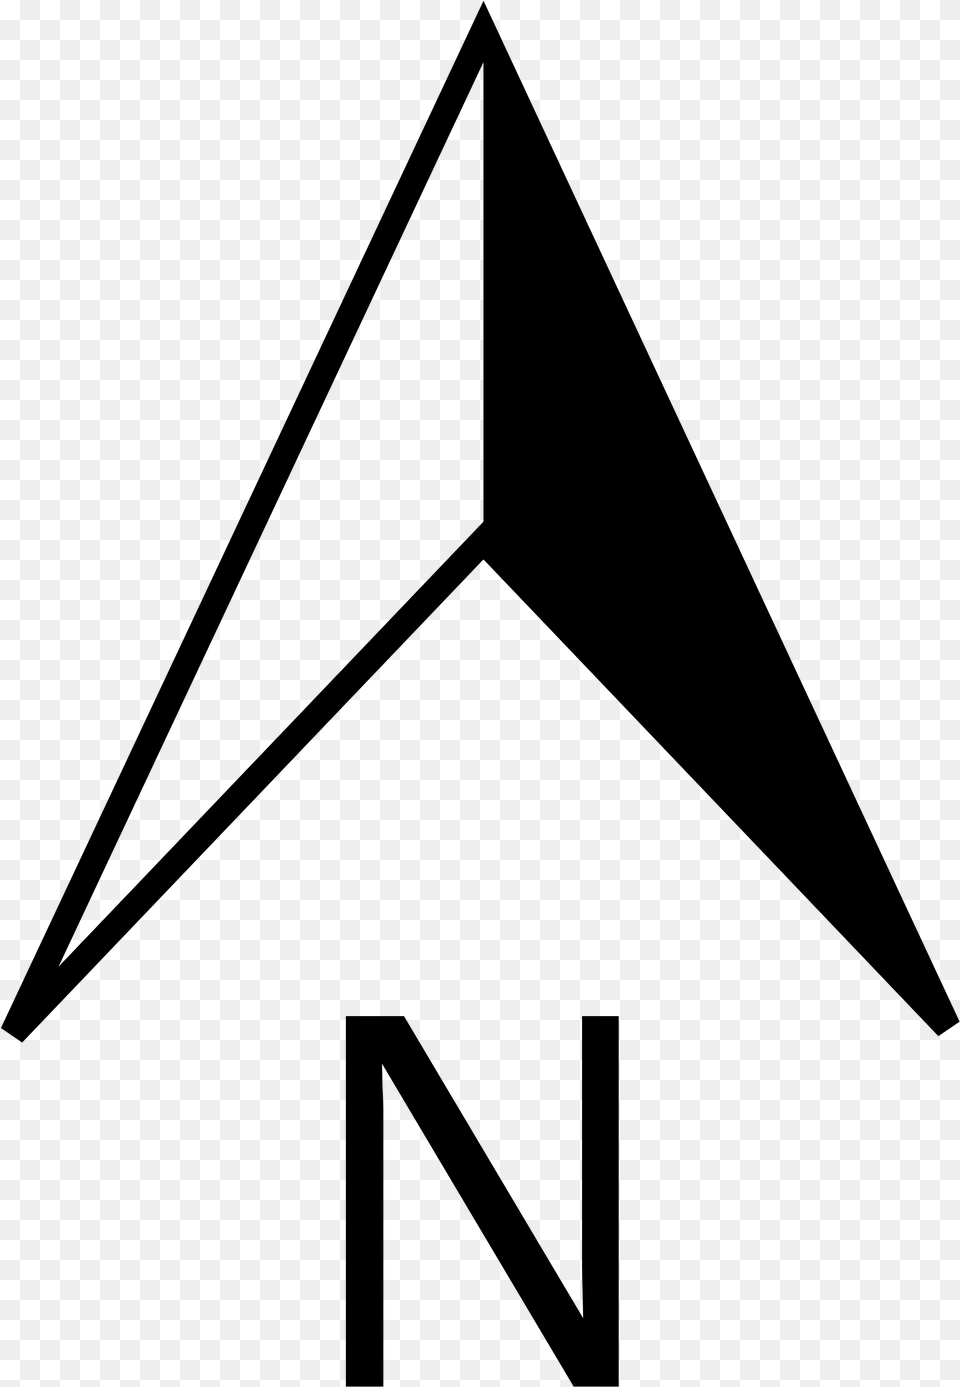 File North Pointer Svg Wikimedia Commons Arrow Clip North Arrow, Gray Free Png